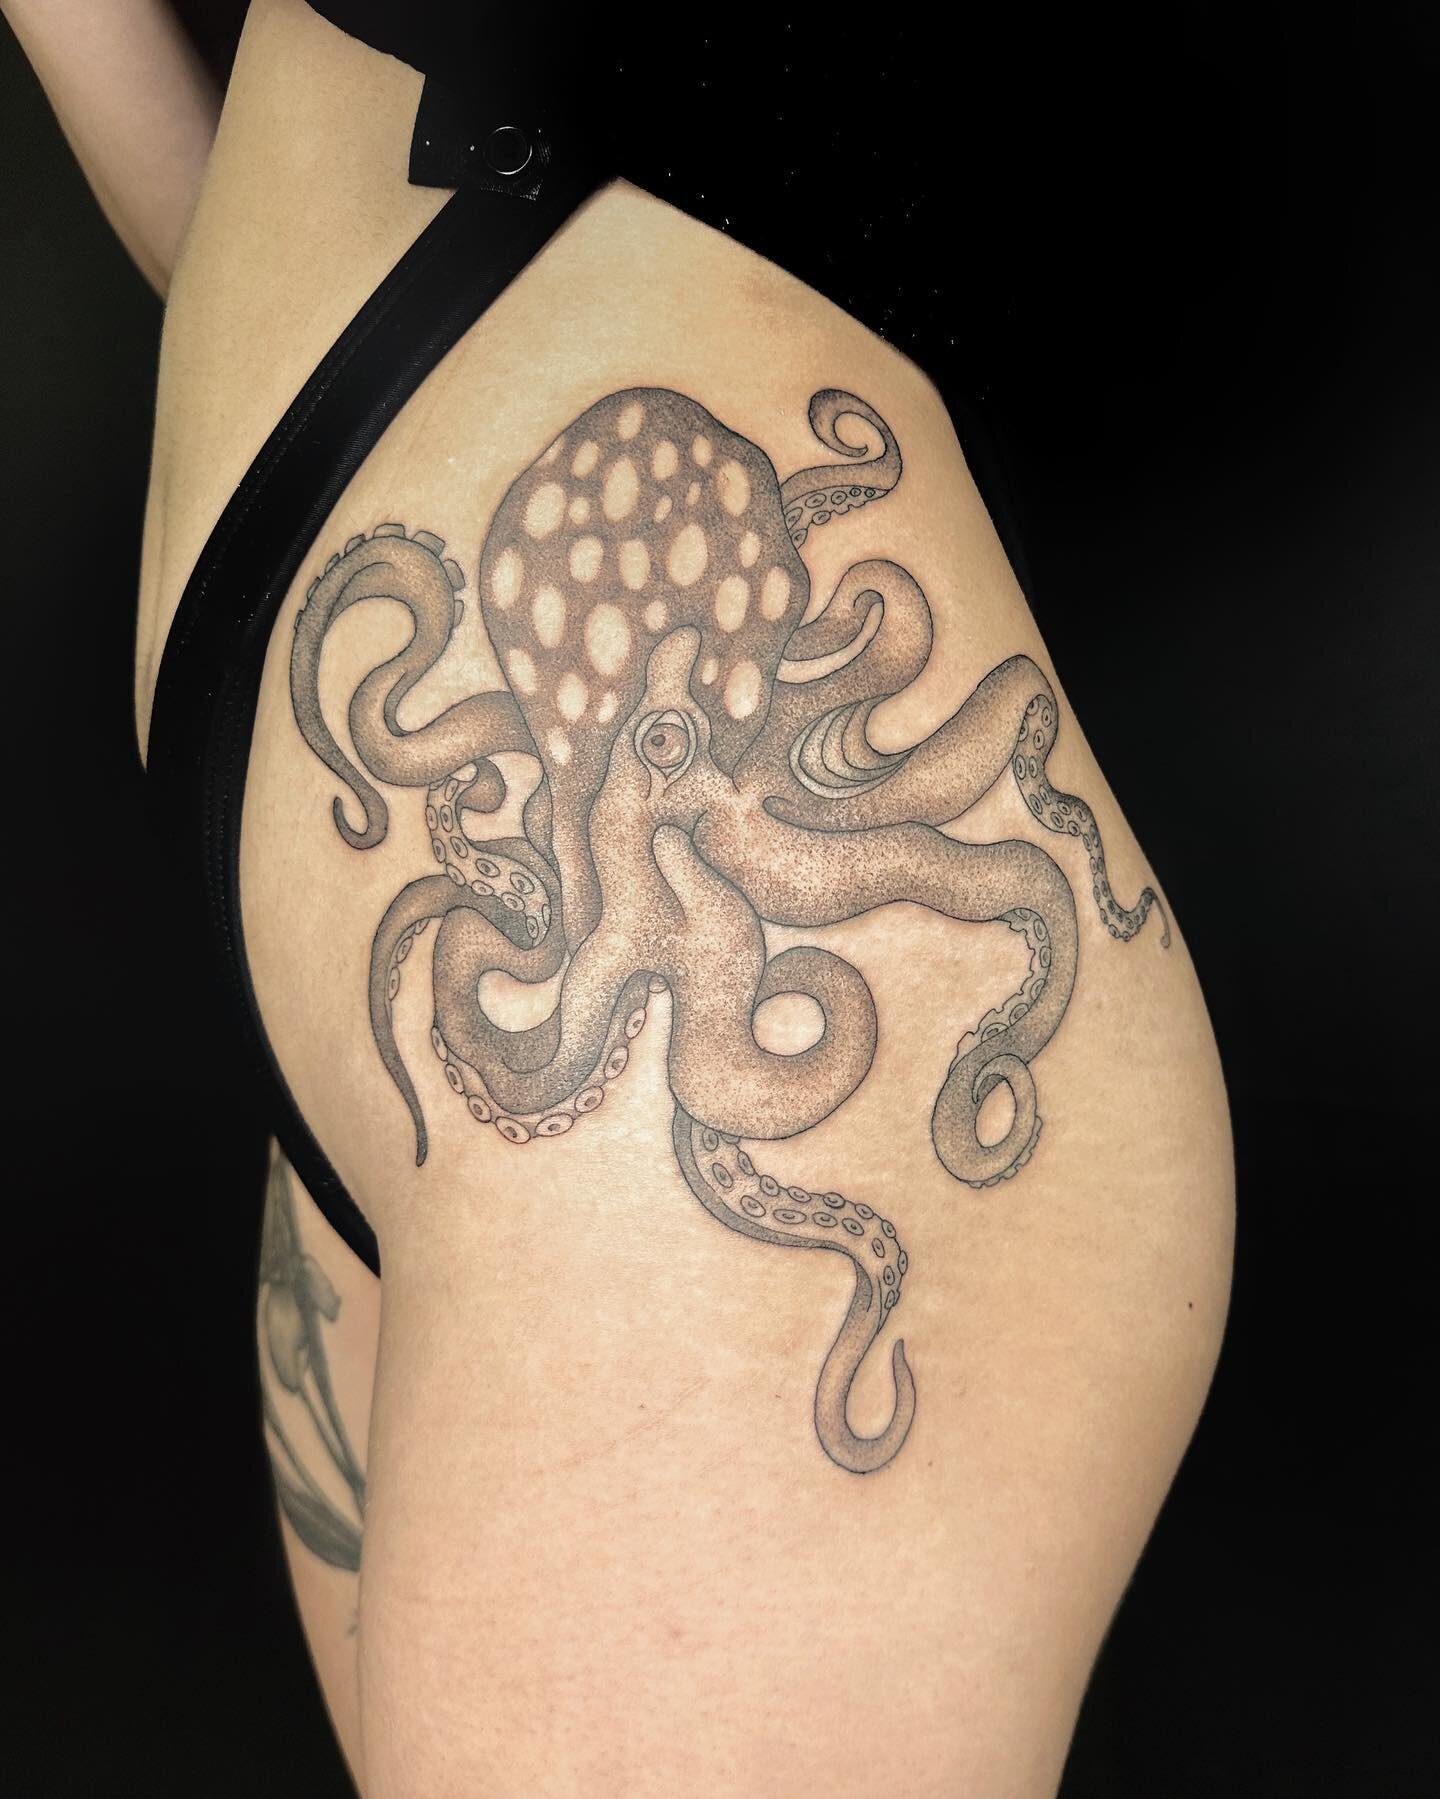 Octopus for a a wonderful return client, swipe for a healed piece from three years back. &ldquo;I once learned that an octopus has three hearts. Though I know it doesn't work quite that way, imagine how much you could love with three hearts. Getting 